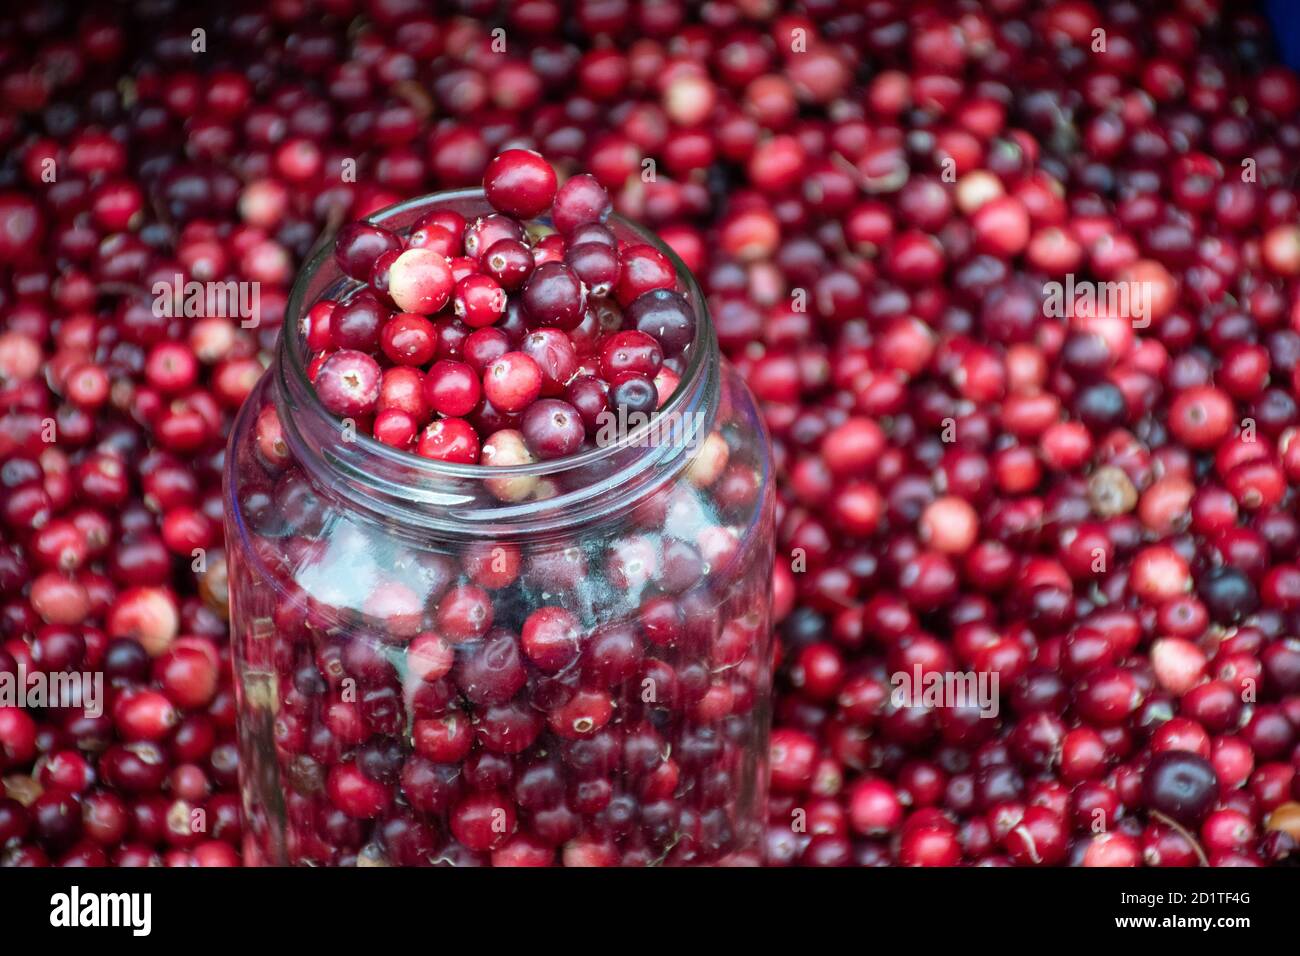 Red fresh healthy cranberries and lingonberries in a street food market ready to sell and eat, with glass jar Stock Photo